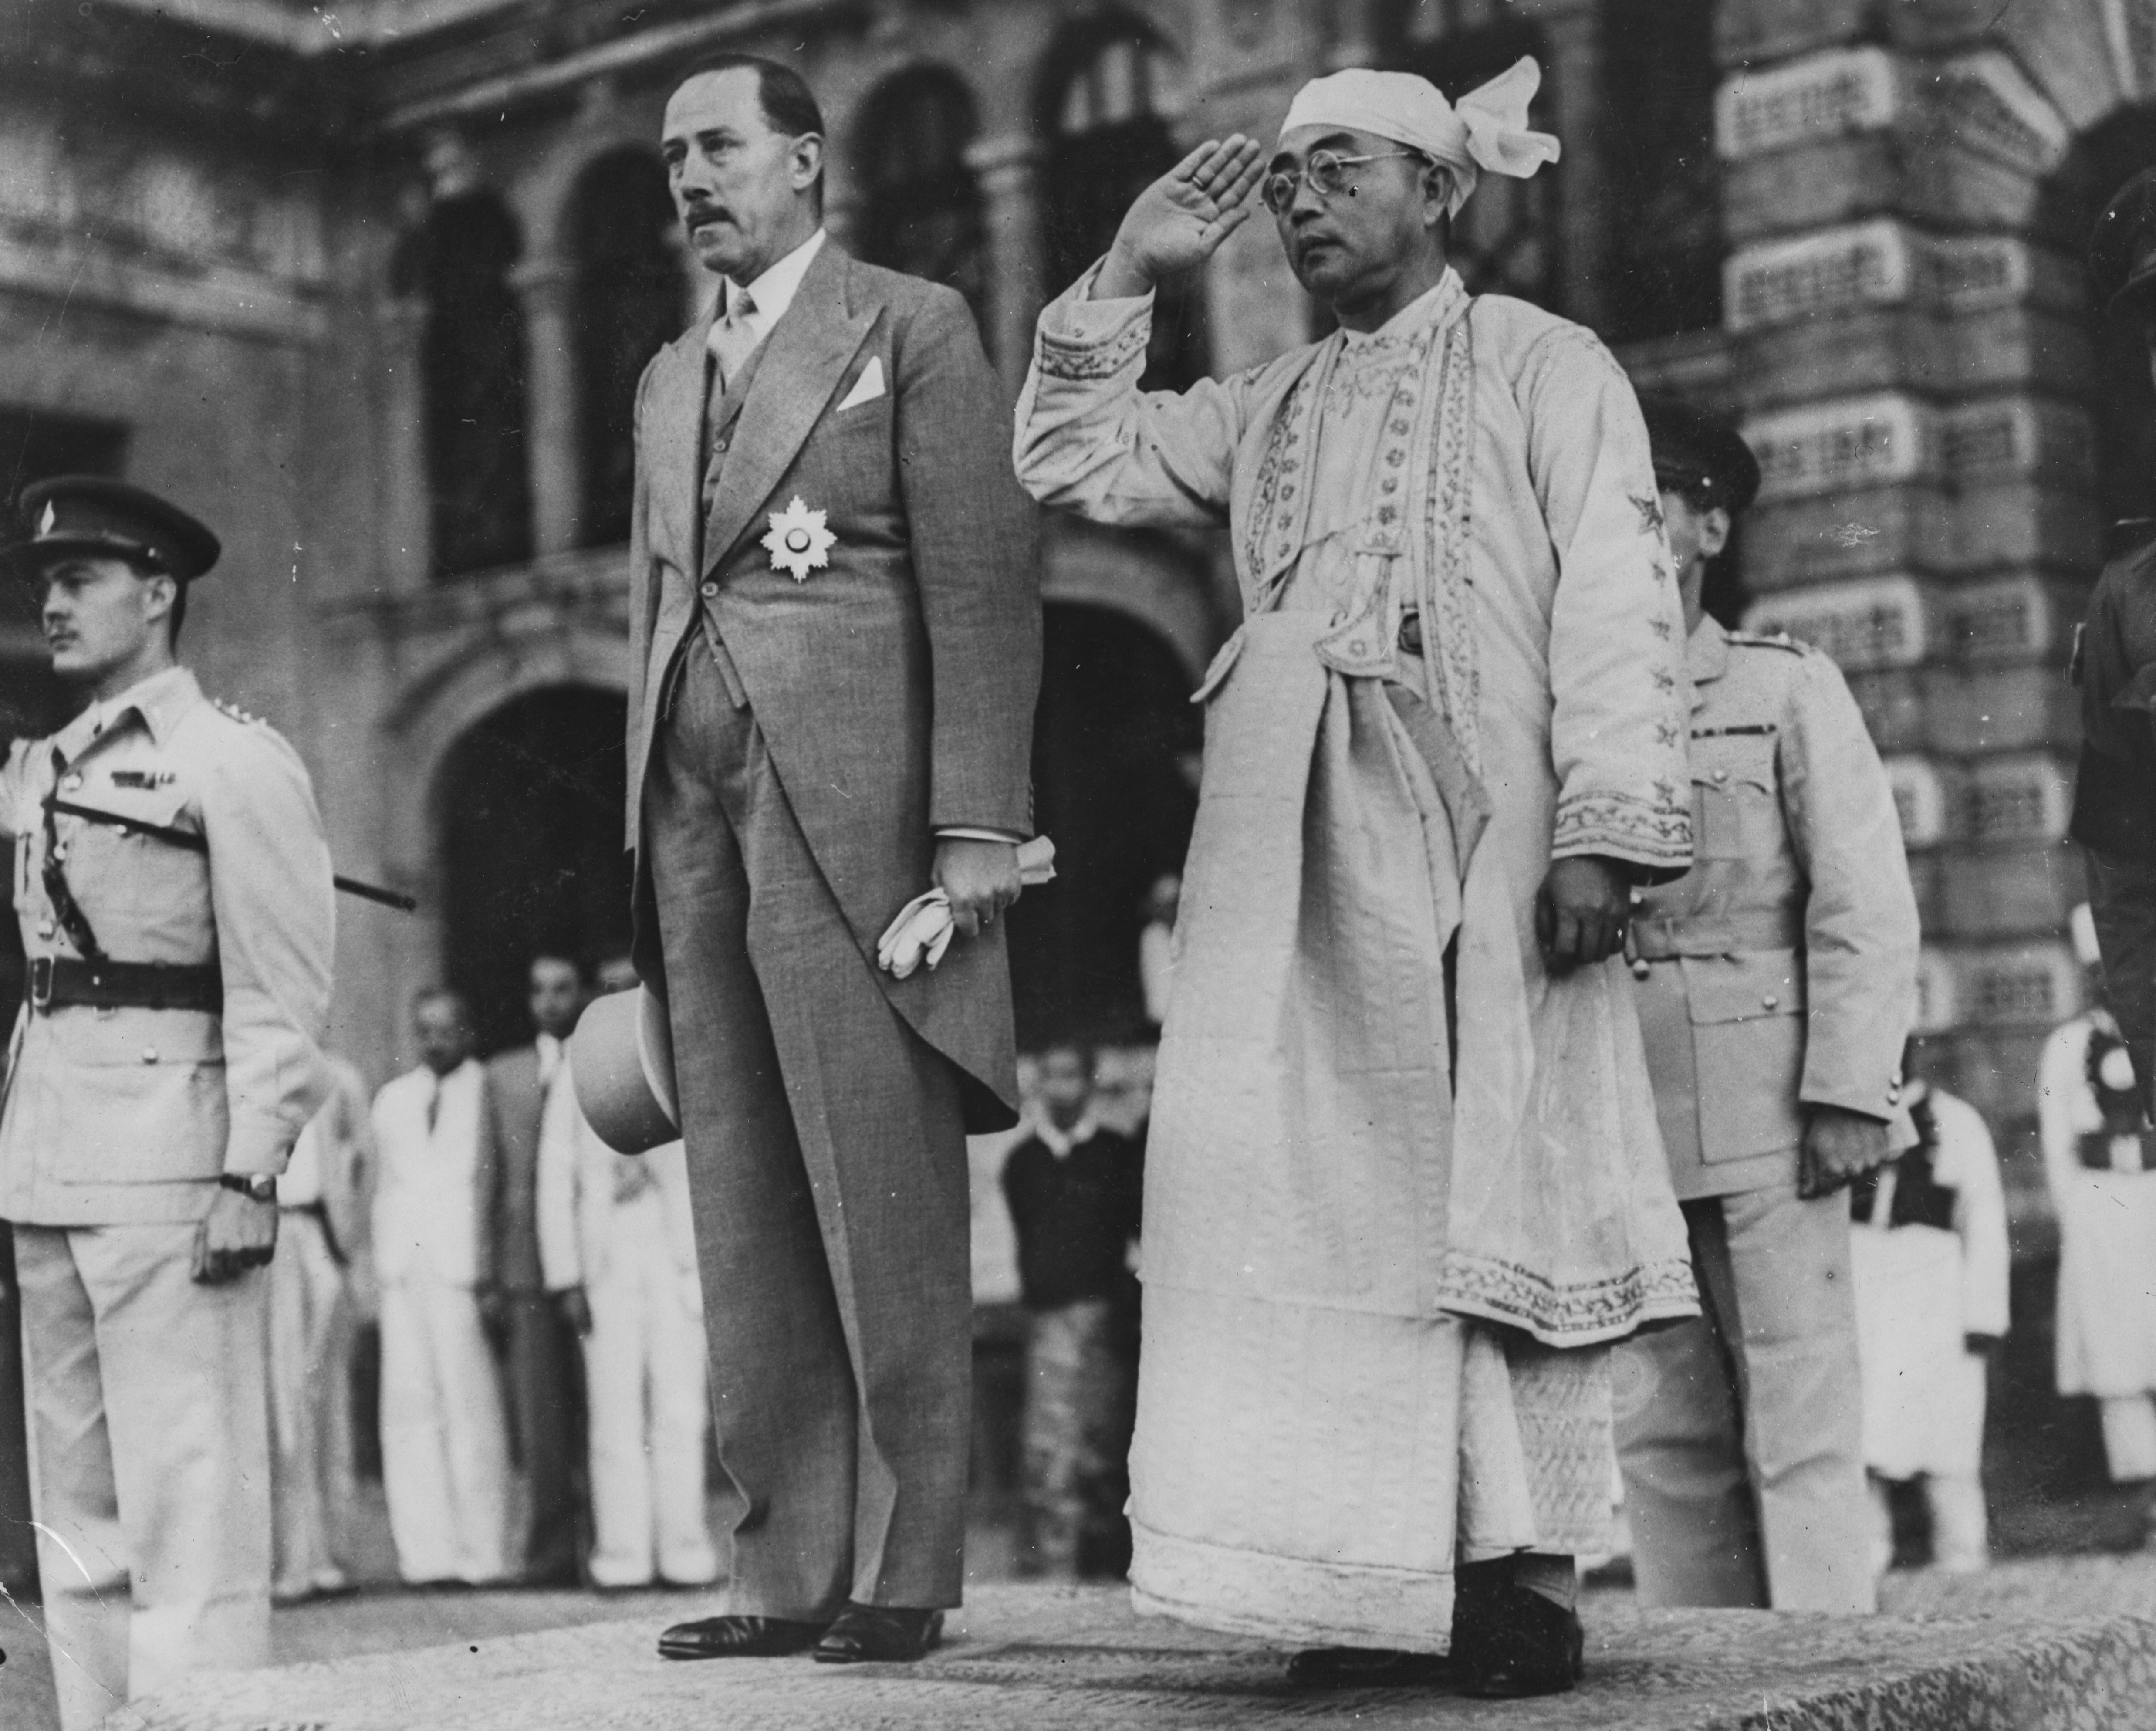 The President of Burma Sao Shwe Thaik (right) saluting as he and Governor Sir Rupert Rance watch a march past of the Guard of Honor, celebrating the inauguration of the Independence of Burma in Rangoon, January 13th 1948. Today, Rangoon goes by Yangon, and Burma is called Myanmar. Image: Keystone / Hulton Archive / Getty Images